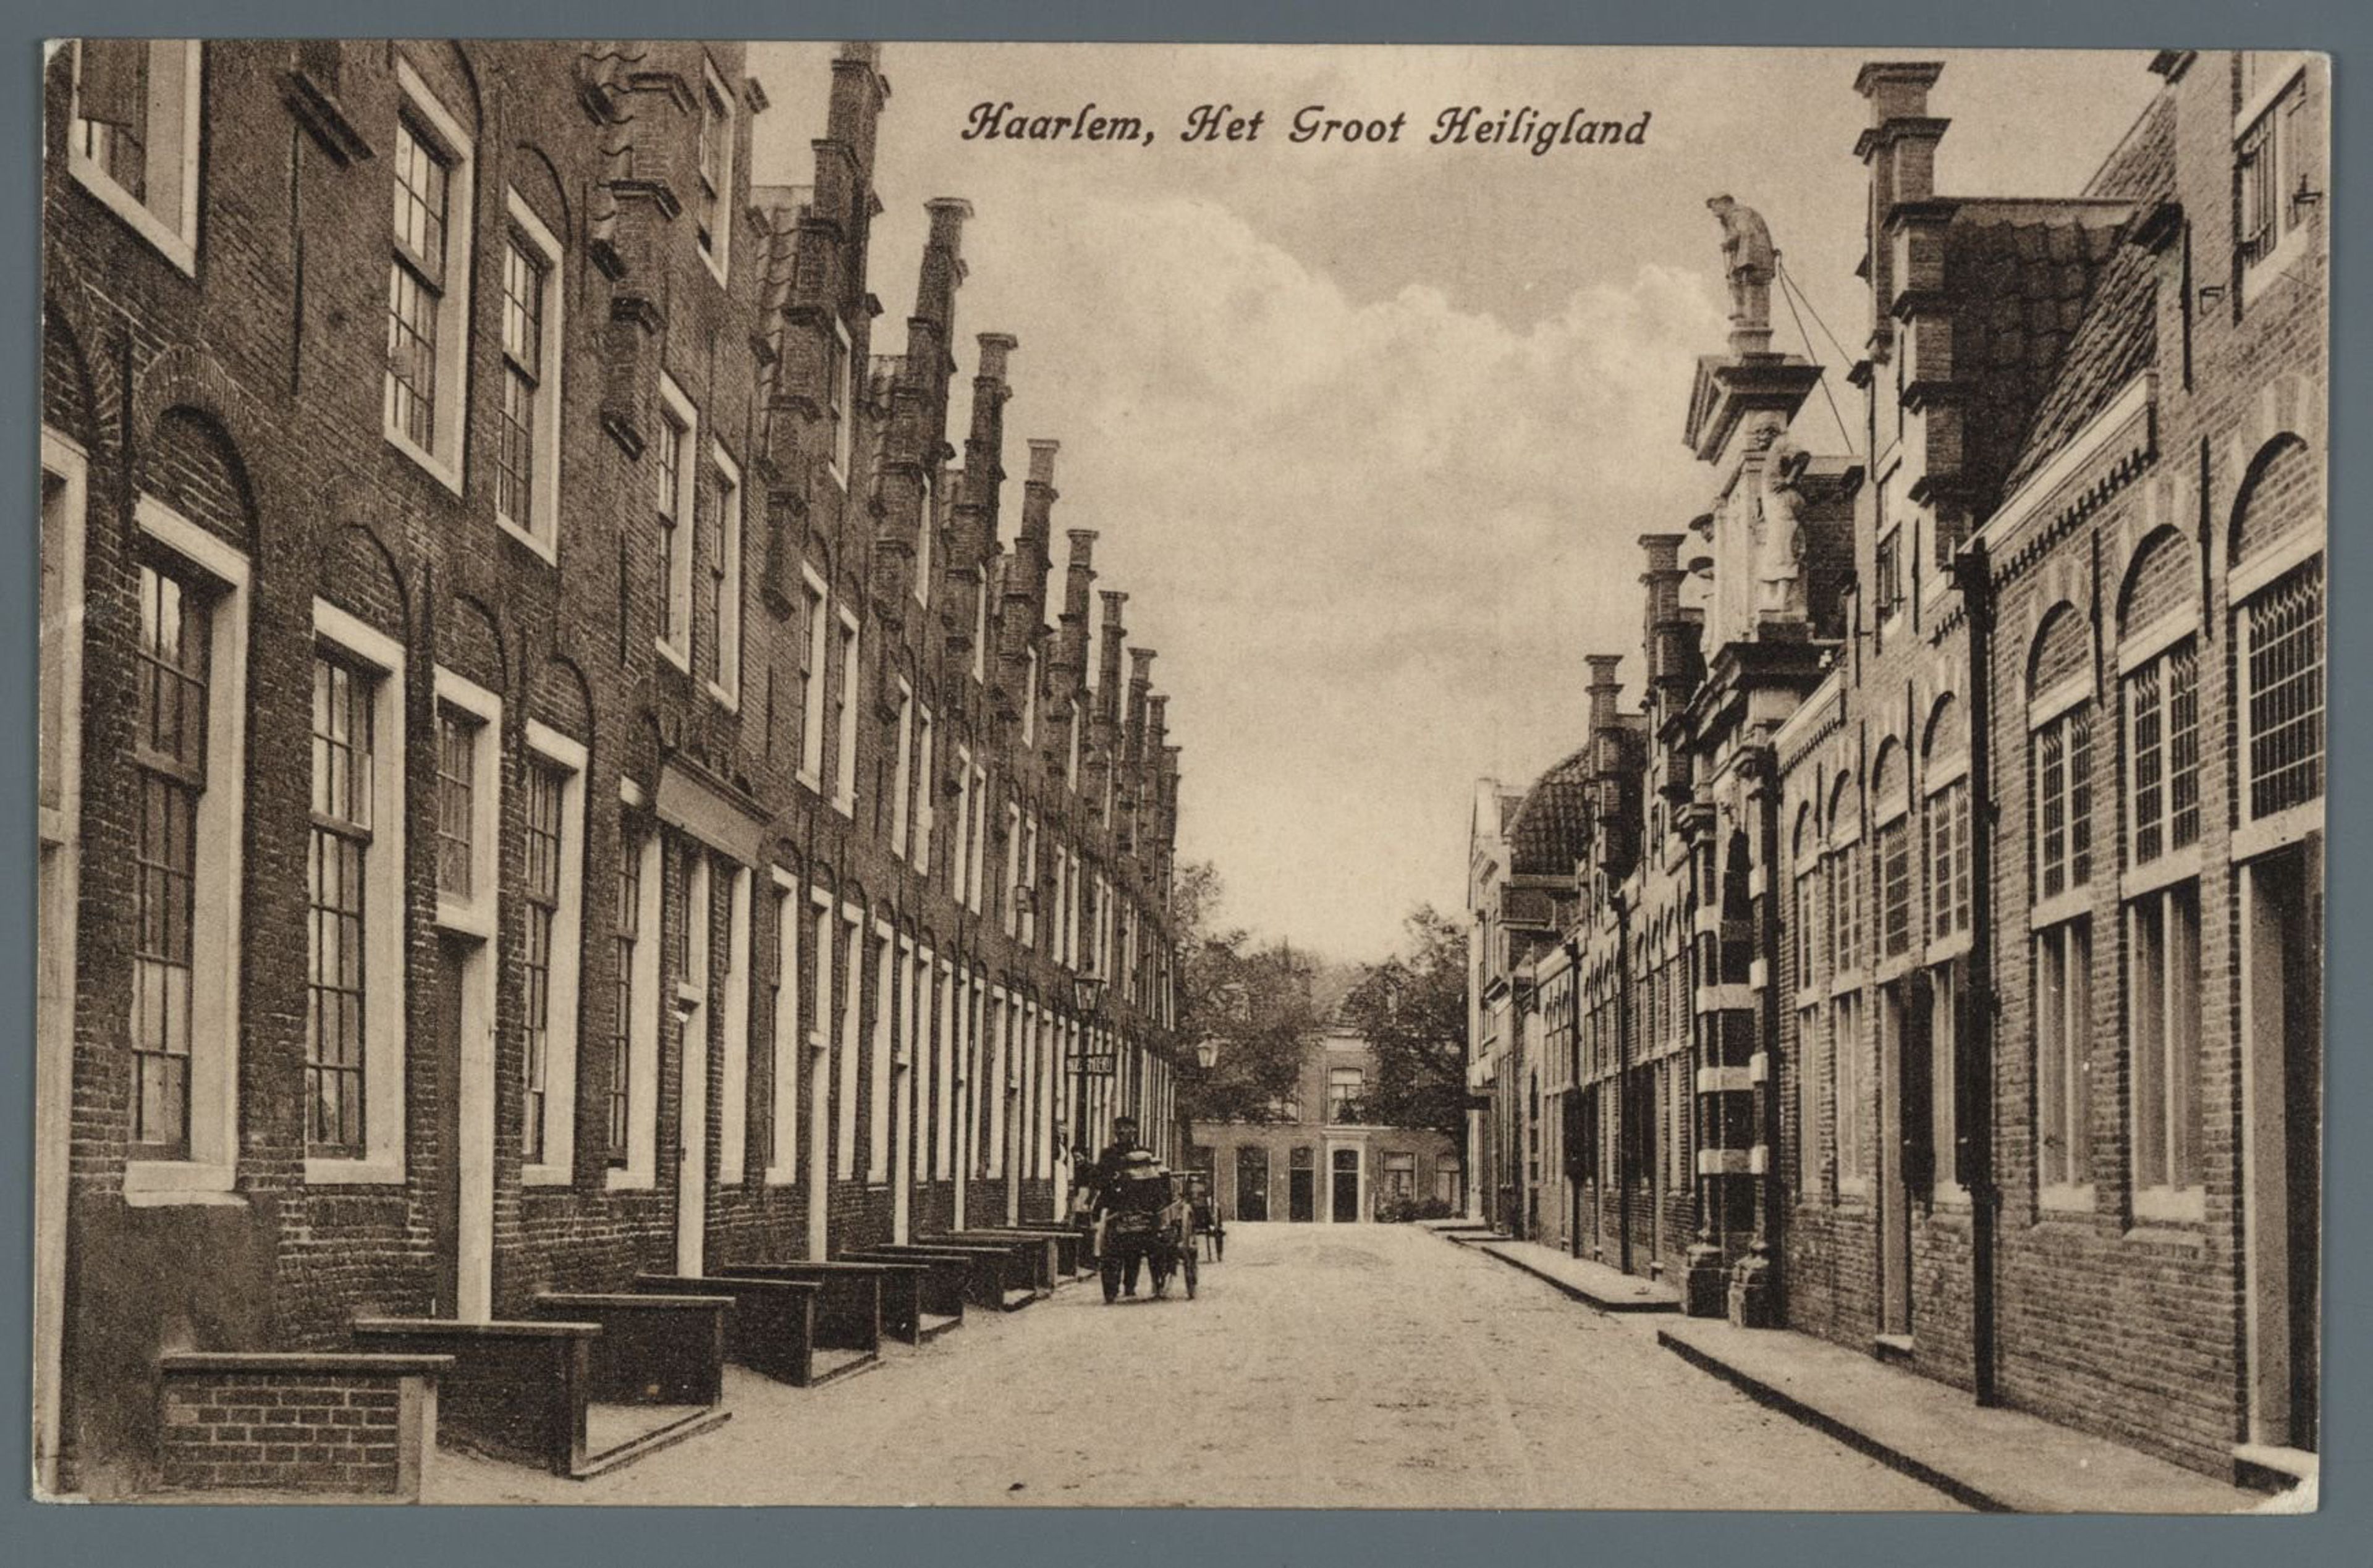 Exterior of the Frans Hals Museum (Groot Heiligland) in the 20th century, photograph from the Noord-Hollands Archief (North Holland Archive) 